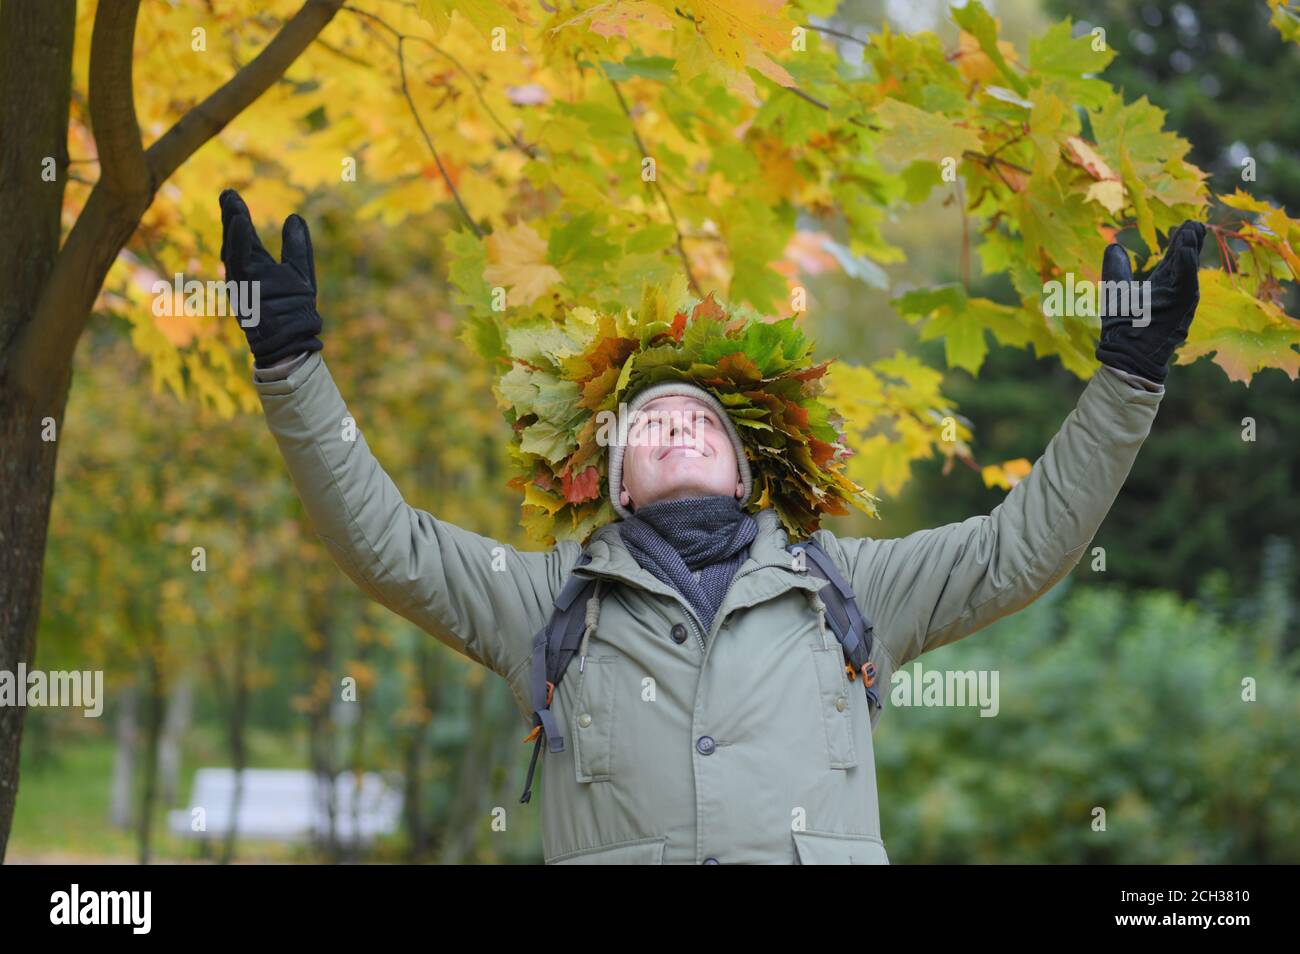 Man in autumn wreath with red and orange leaves raised his hands to the sky and looking upward Stock Photo